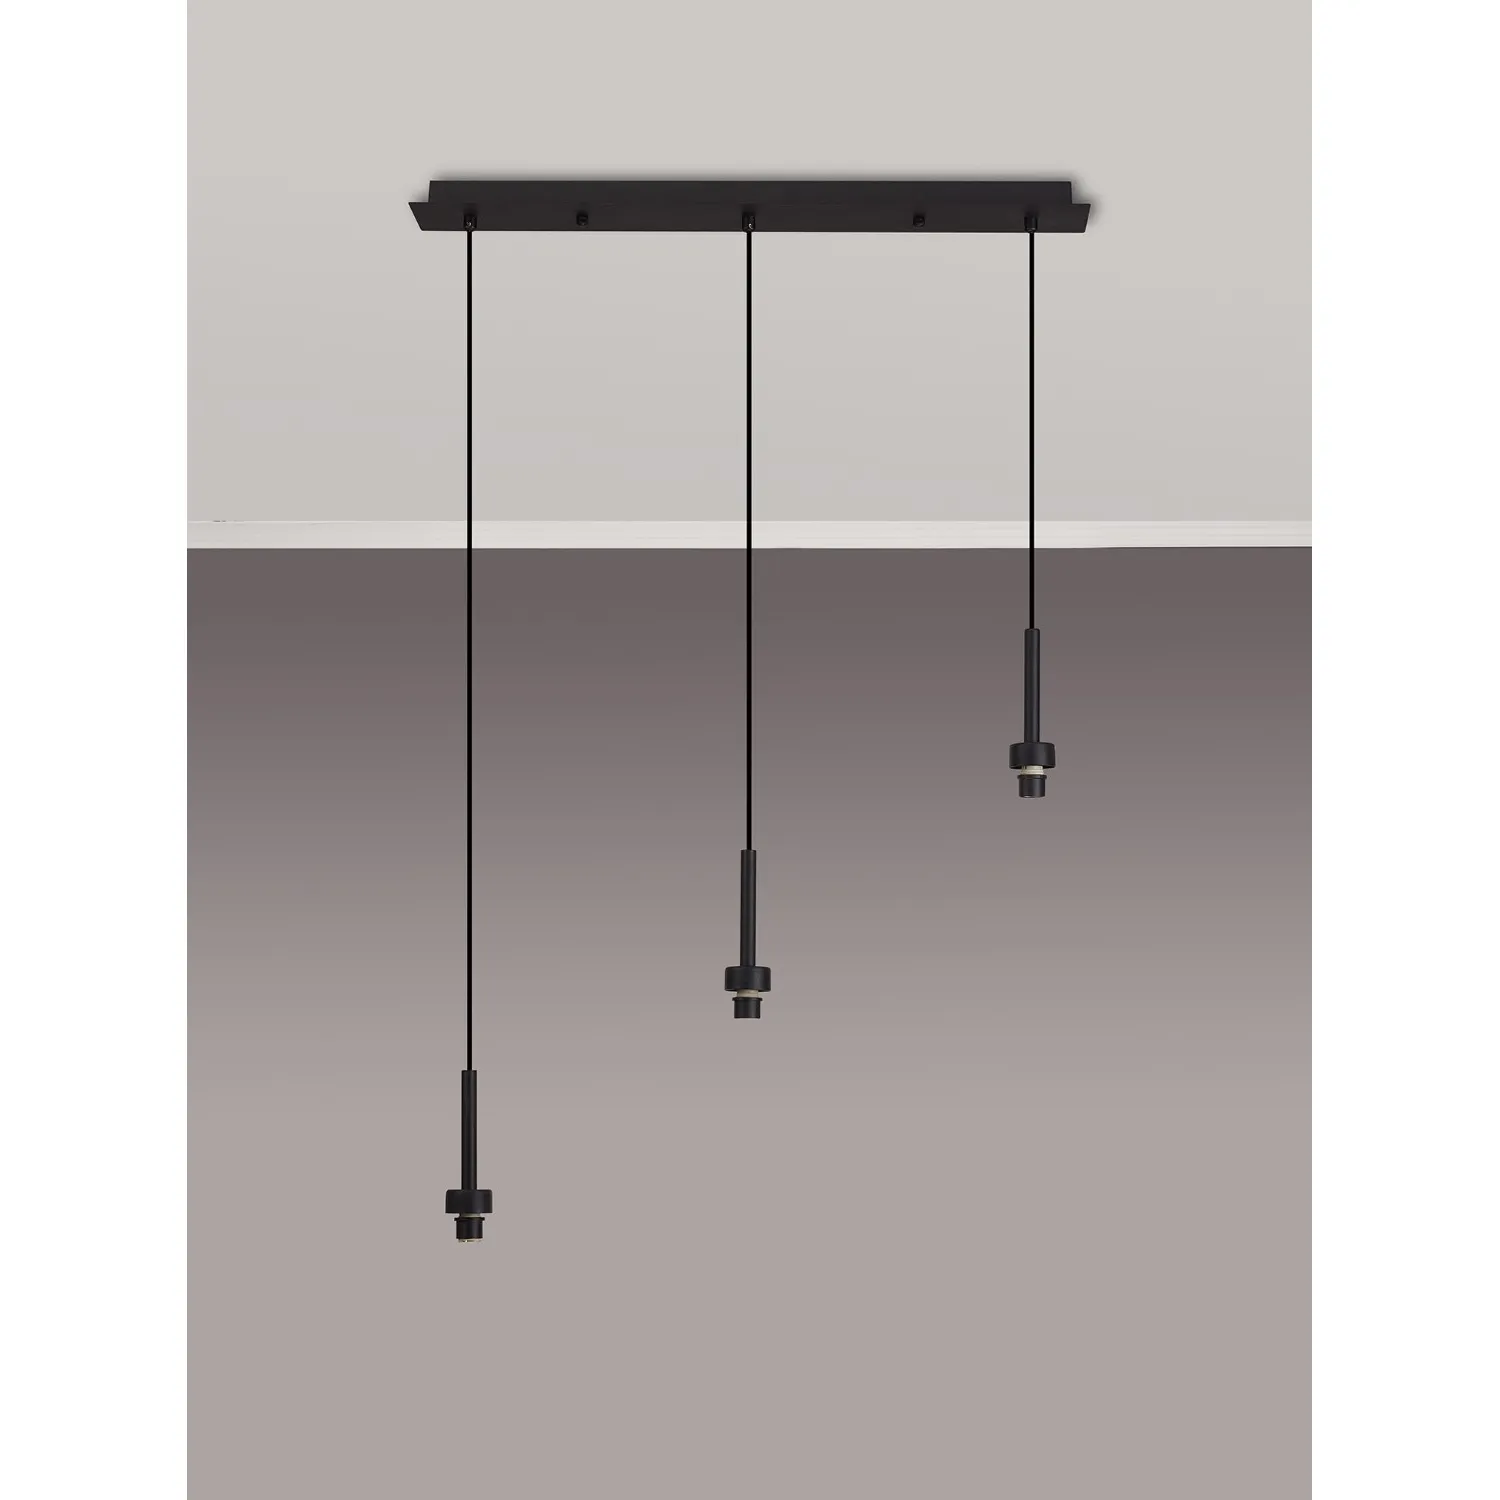 Abingdon Satin Black 3 Light G9 Universal 2m Linear Pendant, Suitable For A Vast Selection Of Glass Shades